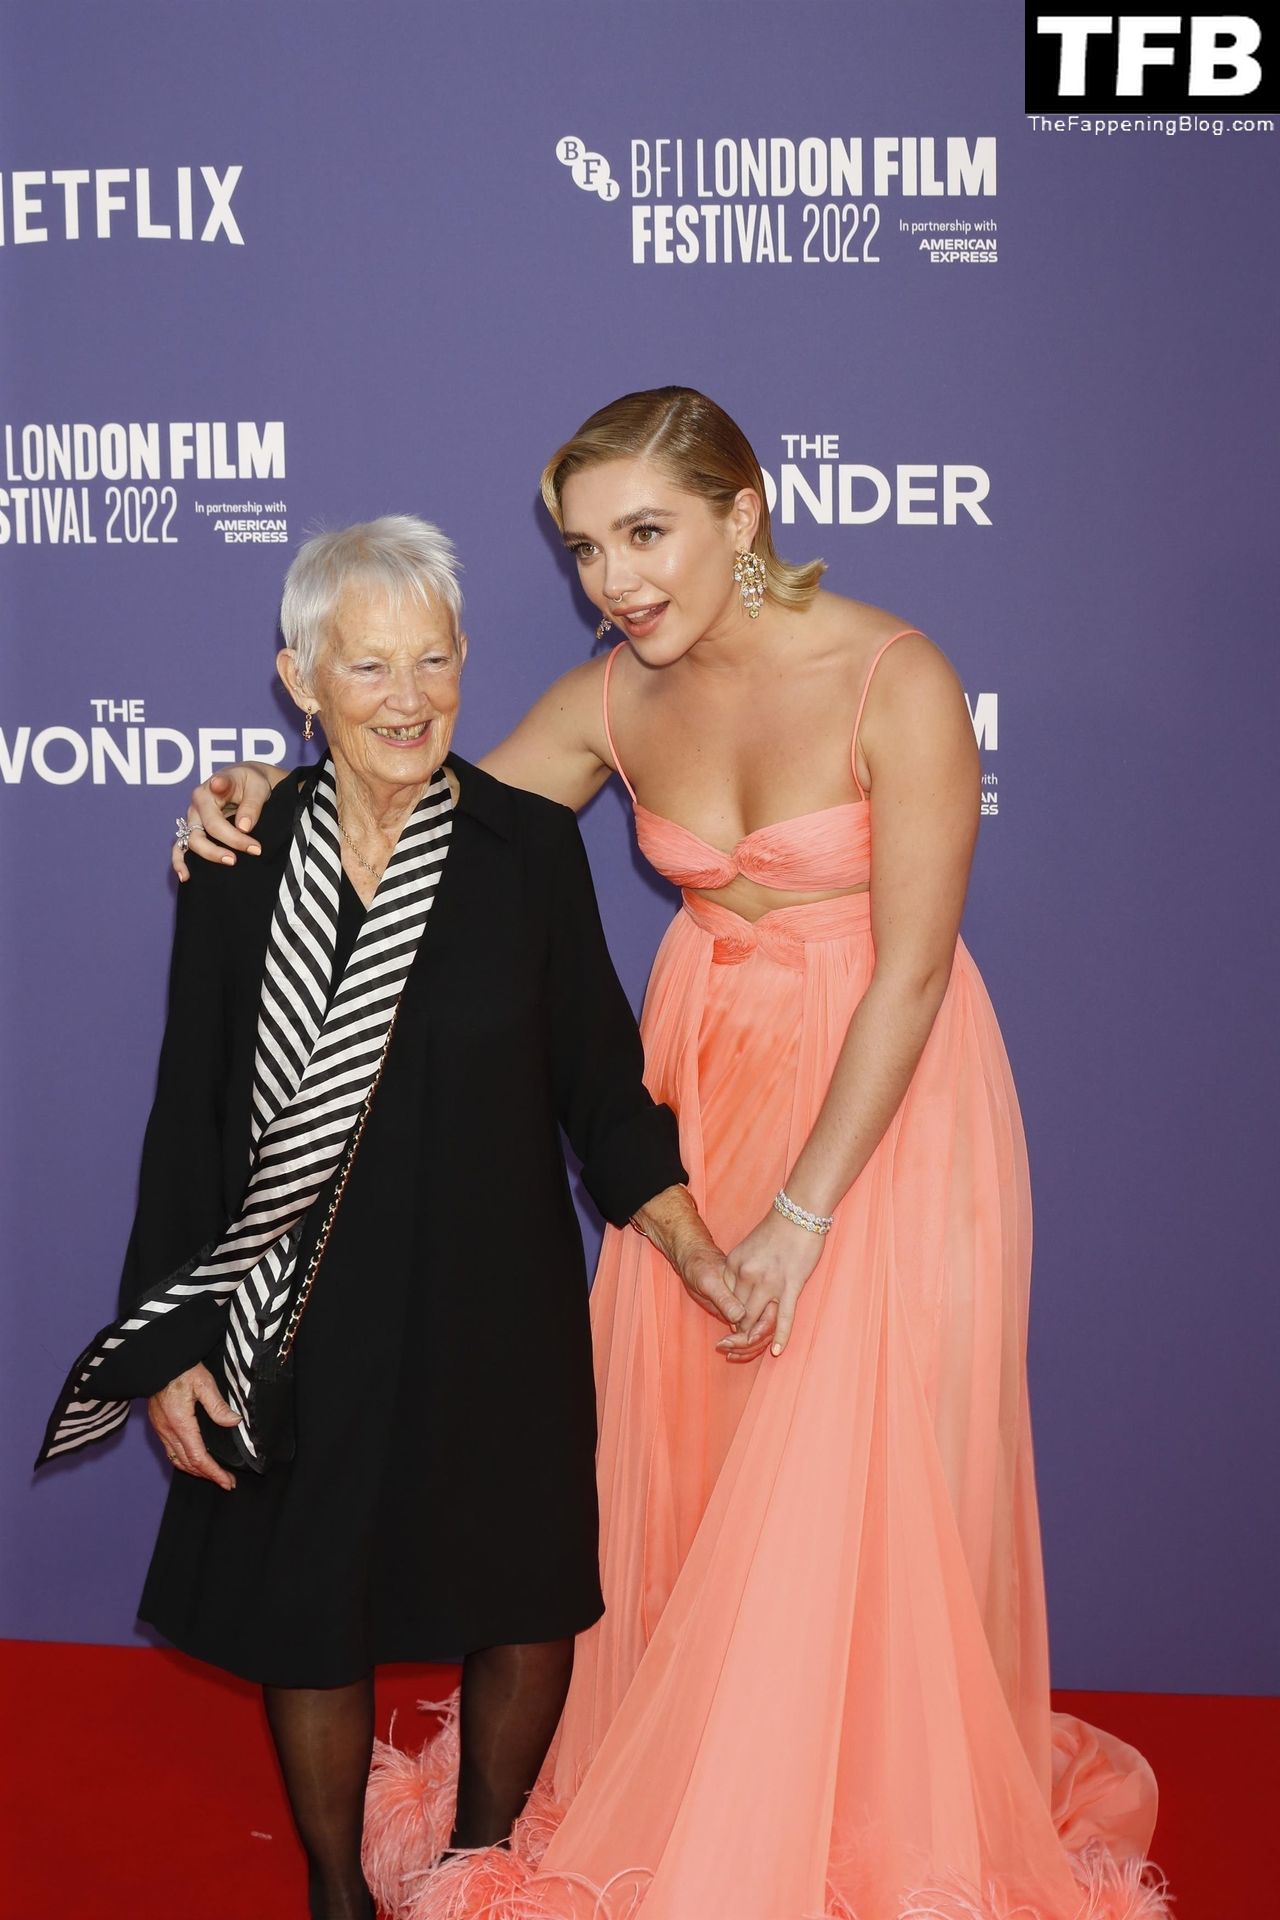 Florence Pugh Stuns on the Red Carpet at “The Wonder” Premiere in London (163 Photos)